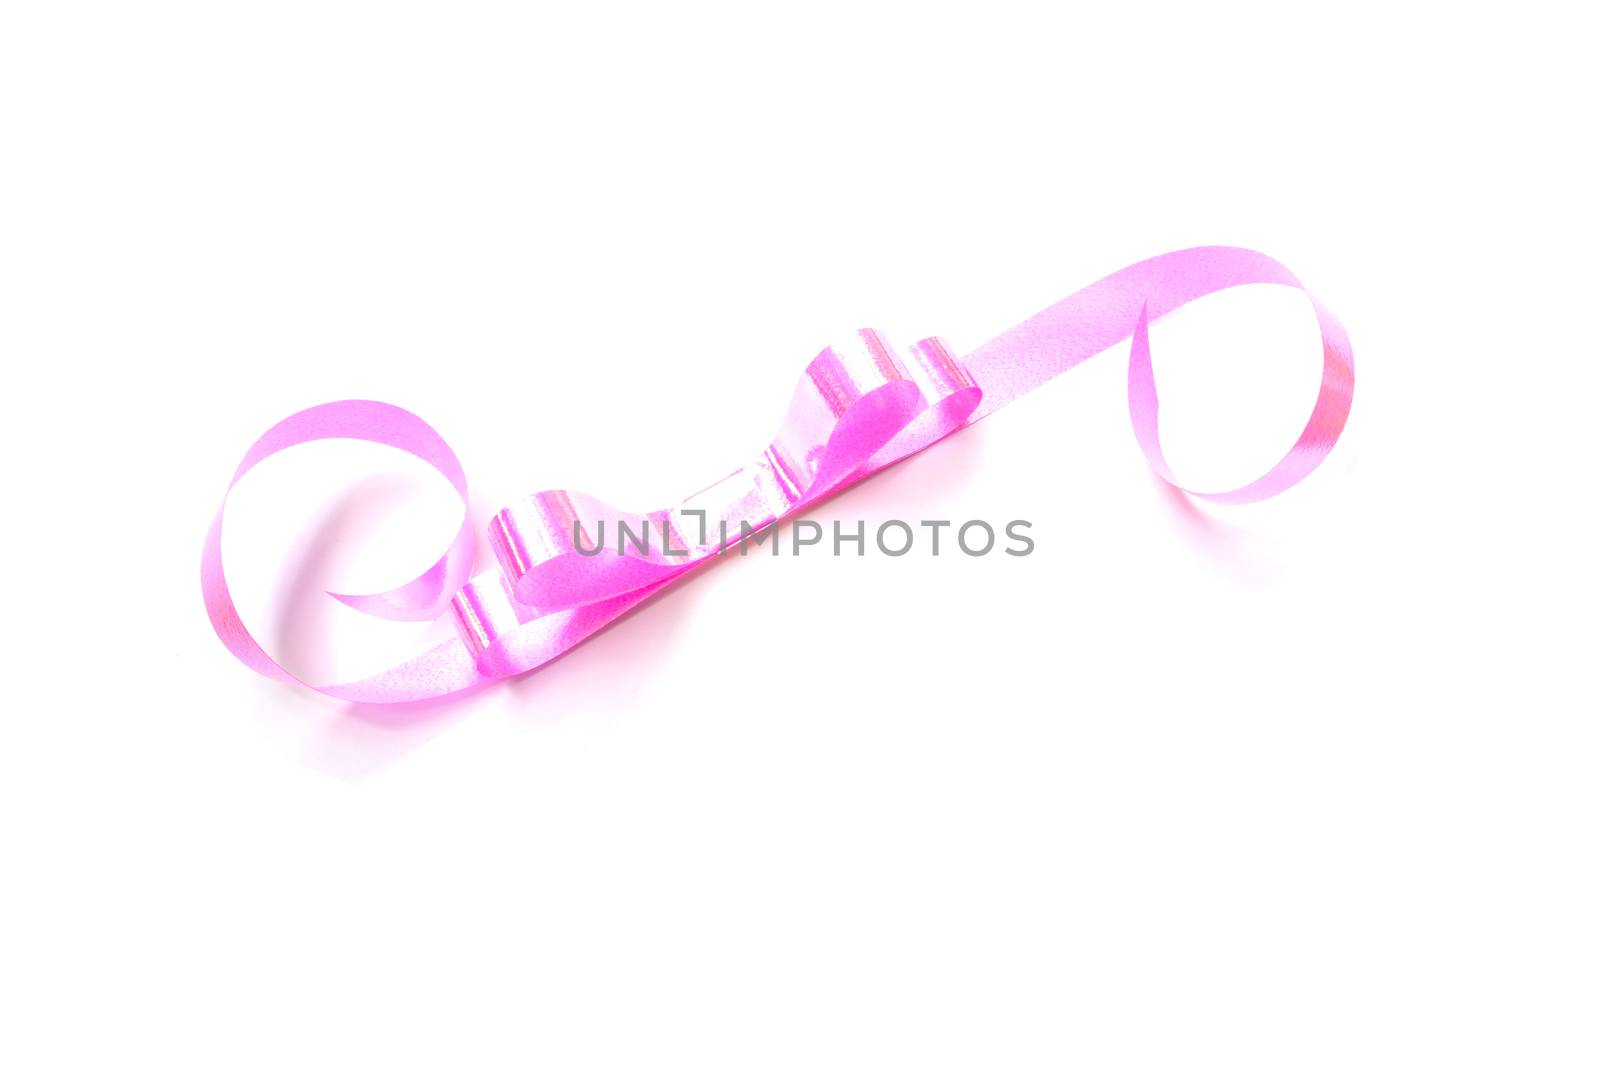 the spiral pink ribbon isolated on white background. by kirisa99